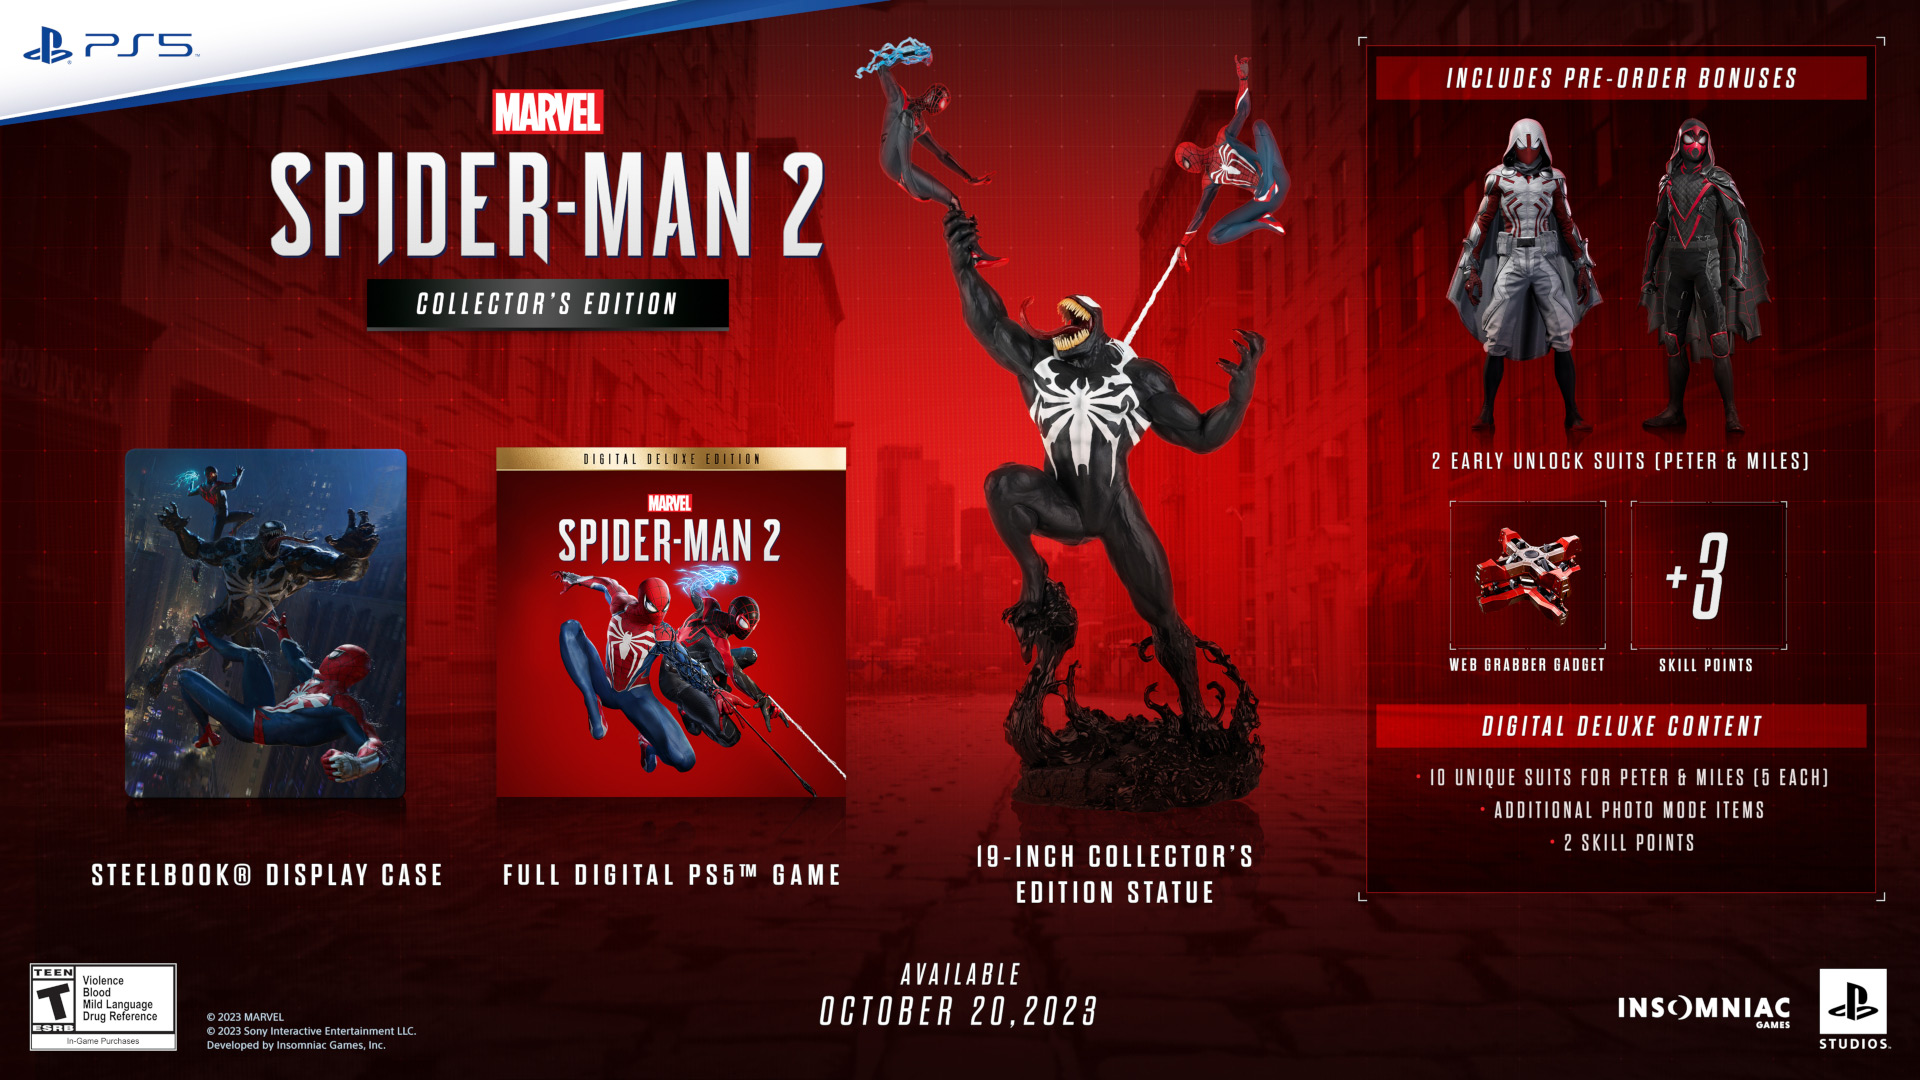 Marvel's Spider-Man 2's Collector's Edition